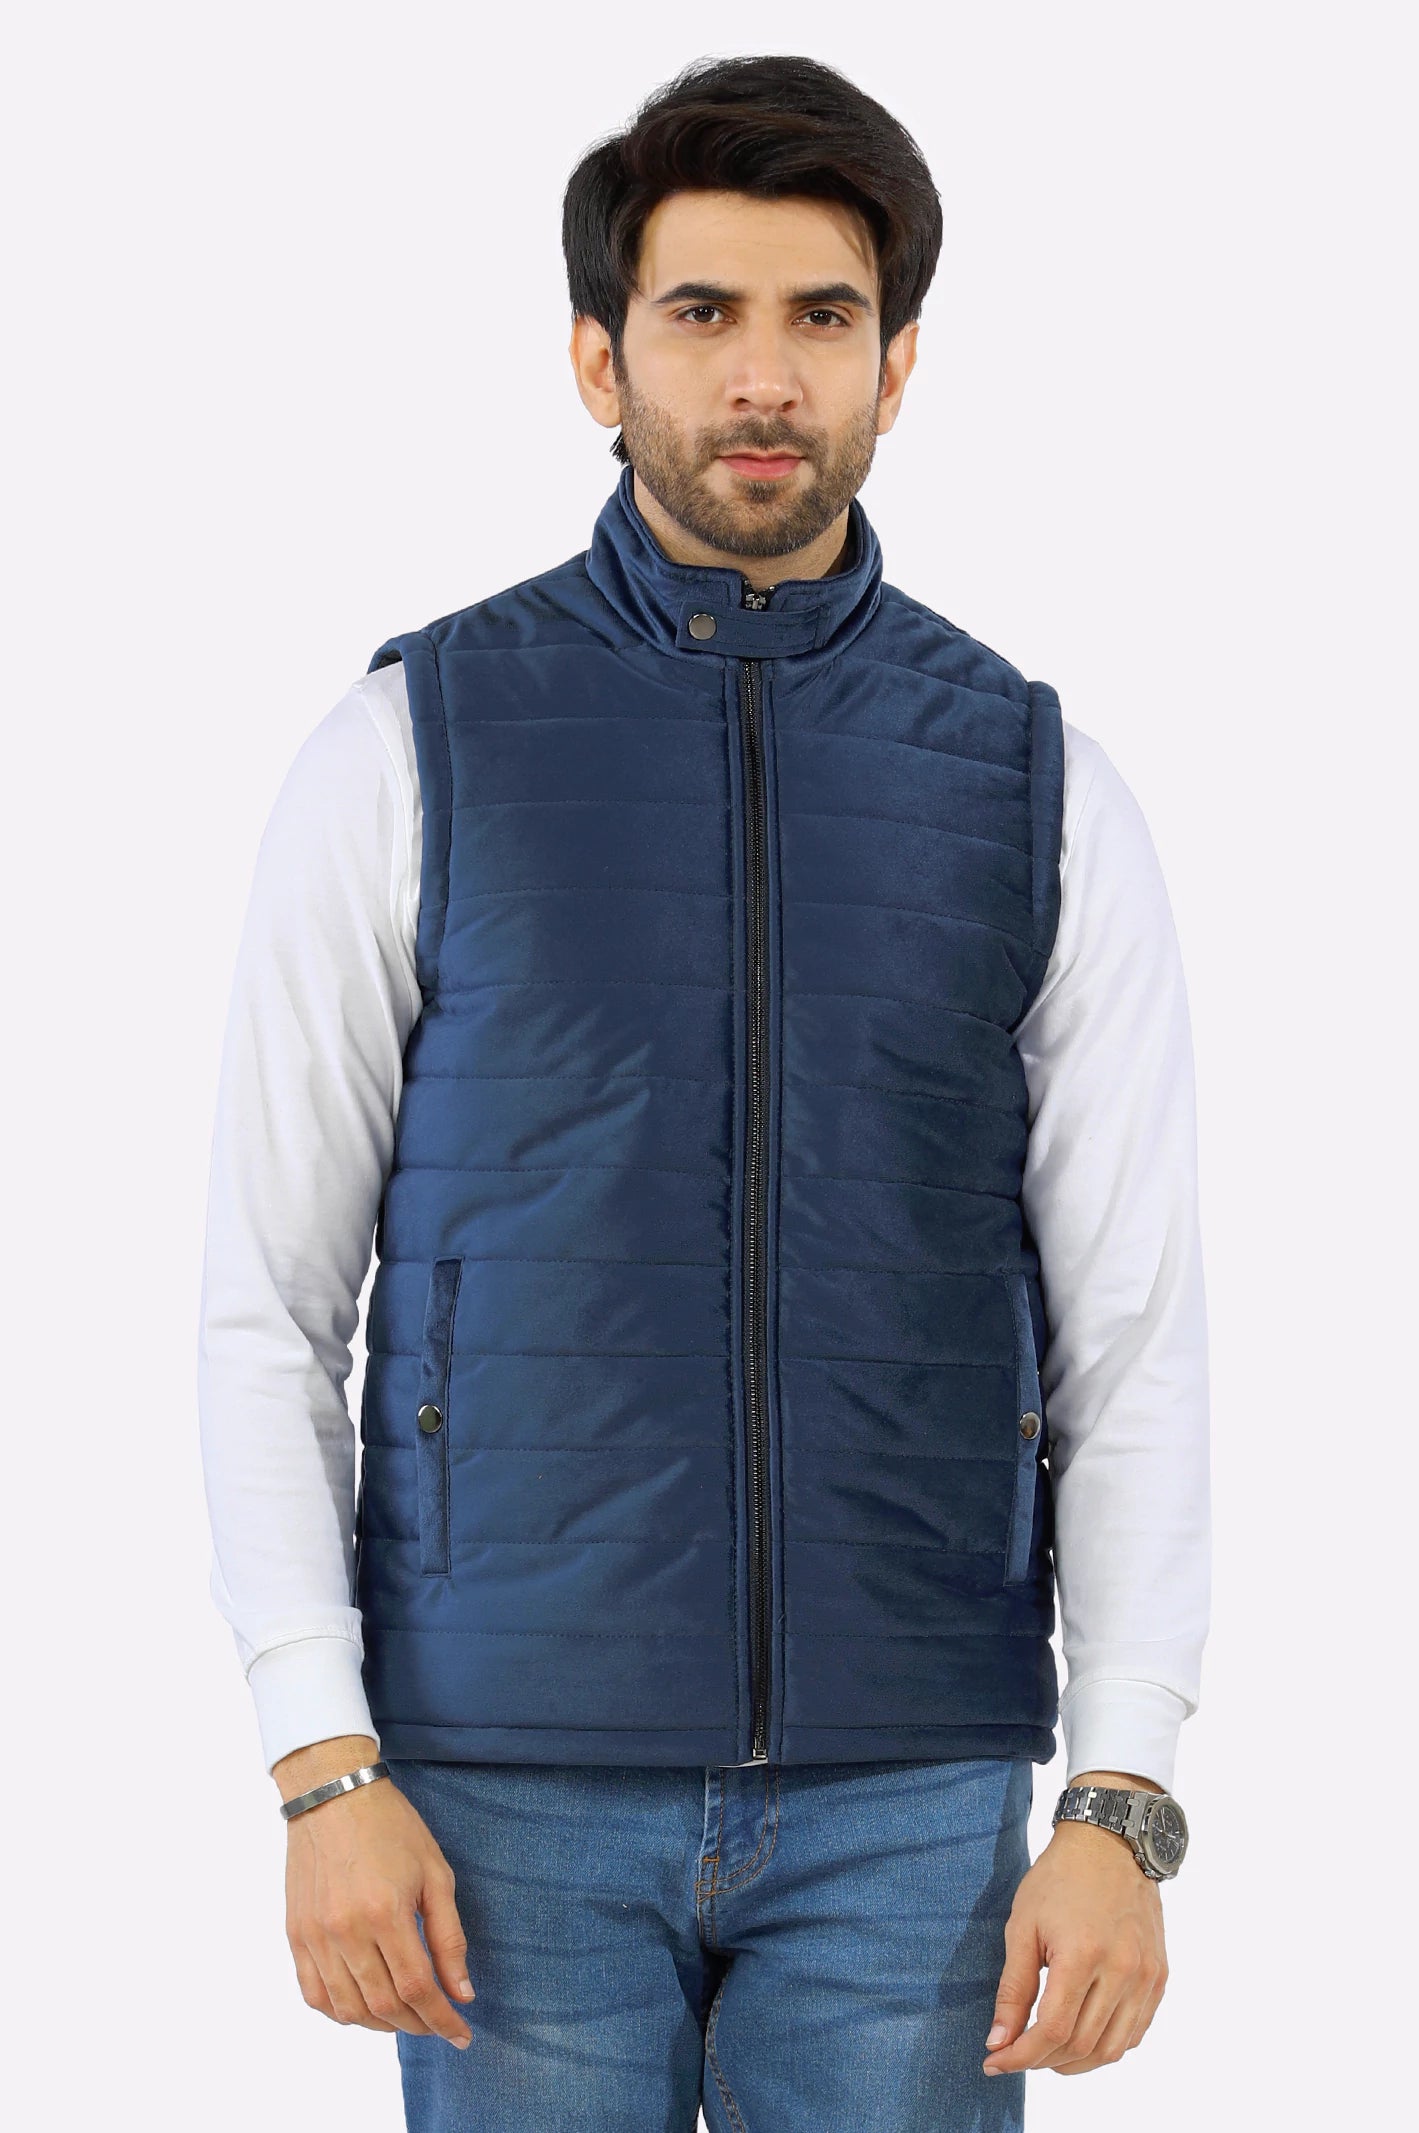 Navy Blue Sleeveless Men's Jacket From Diners